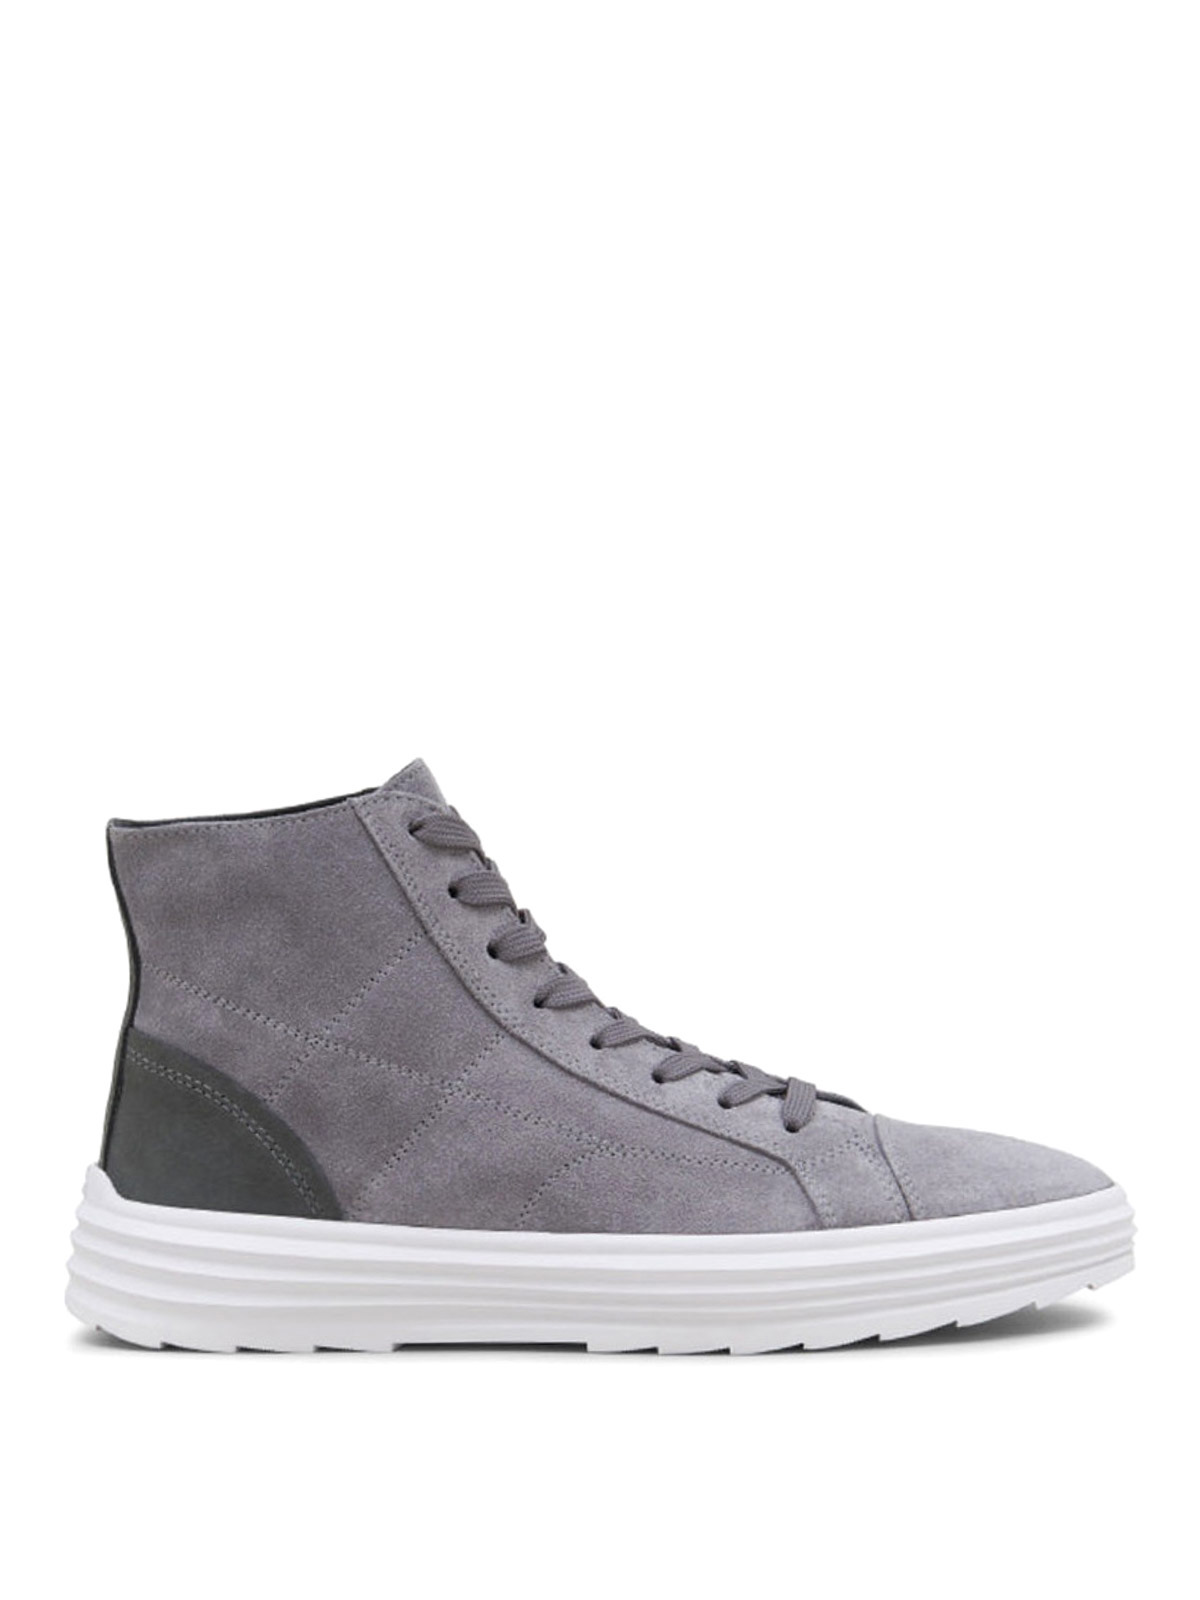 Hogan - Helix H341 quilted suede sneakers - trainers - HXM3410J180HRN16F2